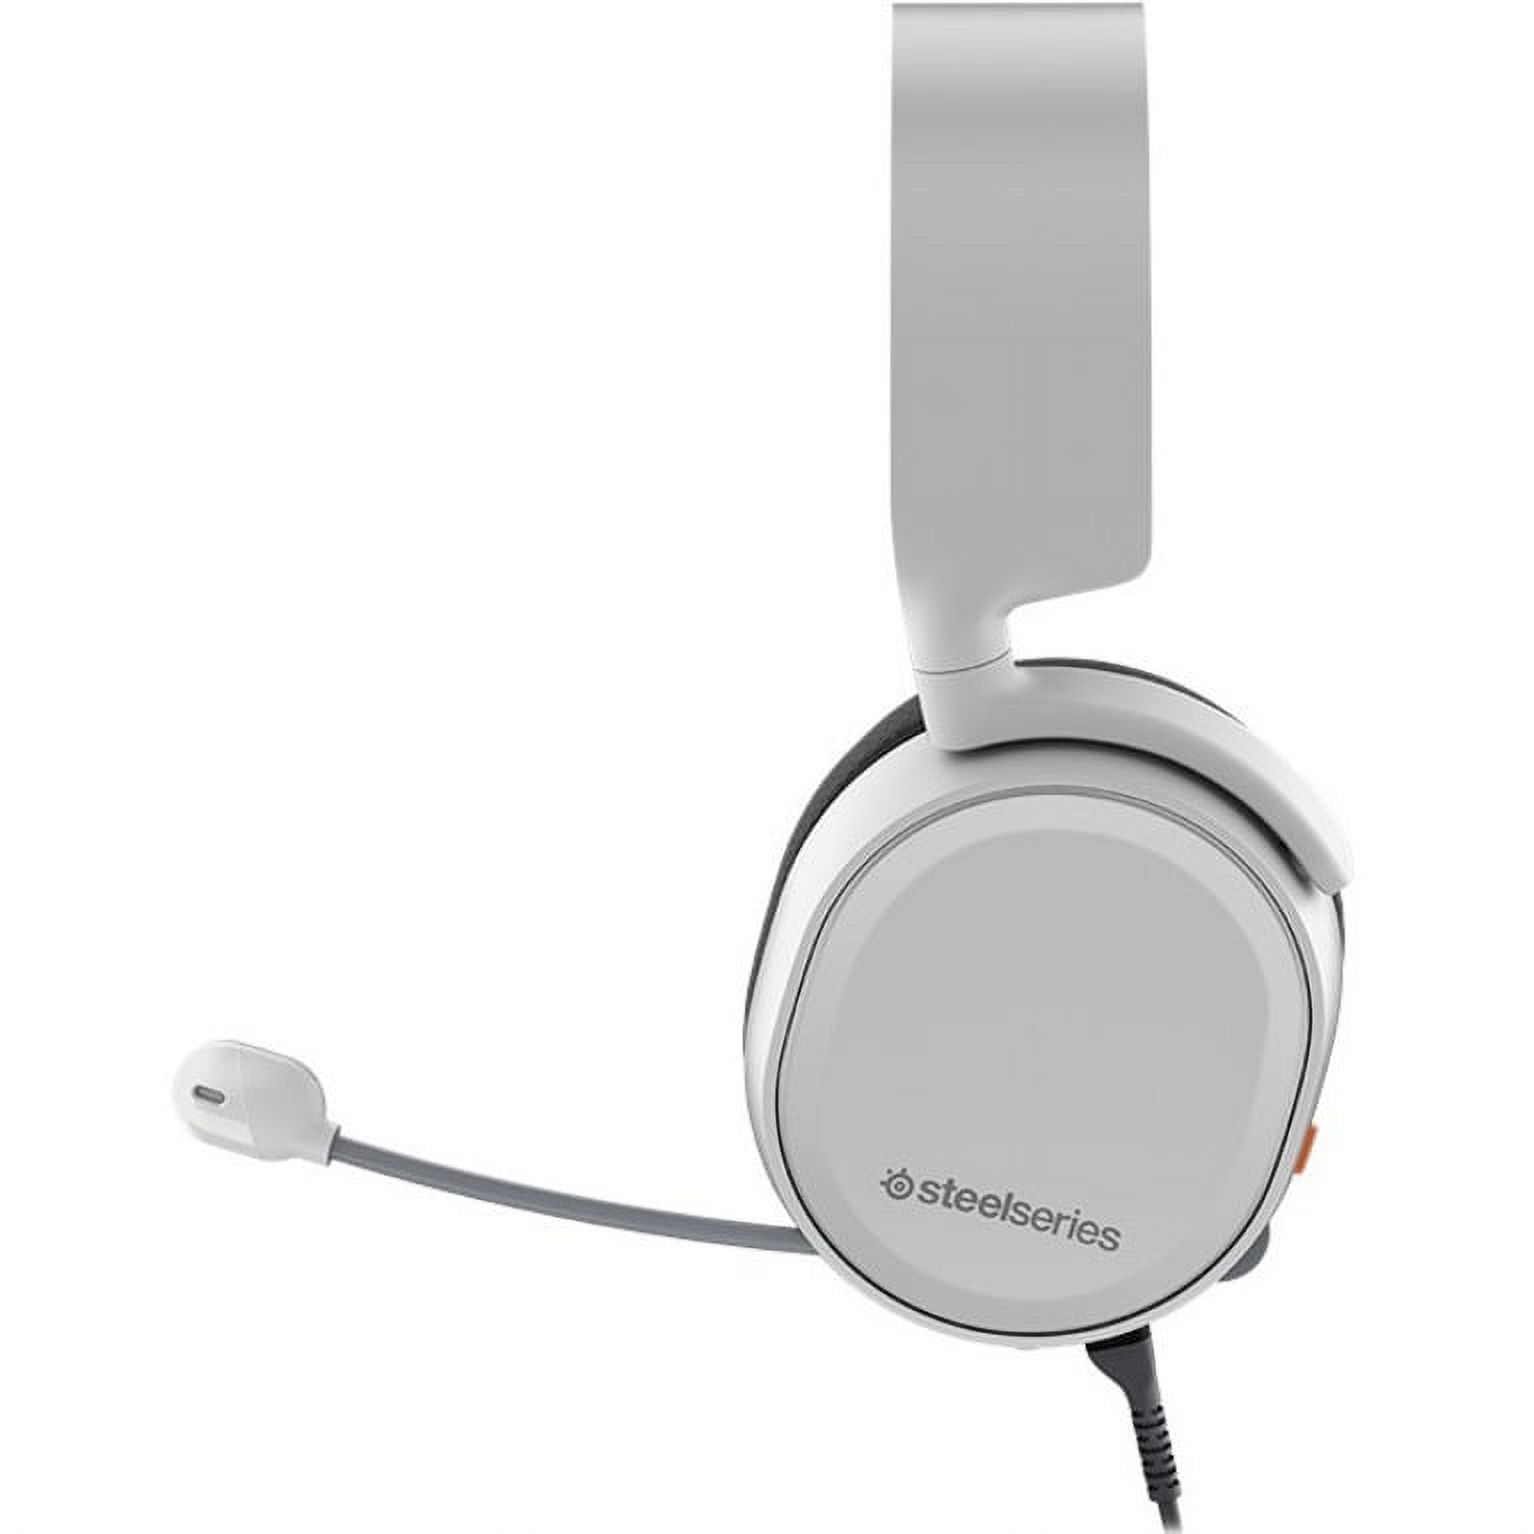 SteelSeries Arctis 3 Gaming Headset, White, 4T8451 - image 2 of 4